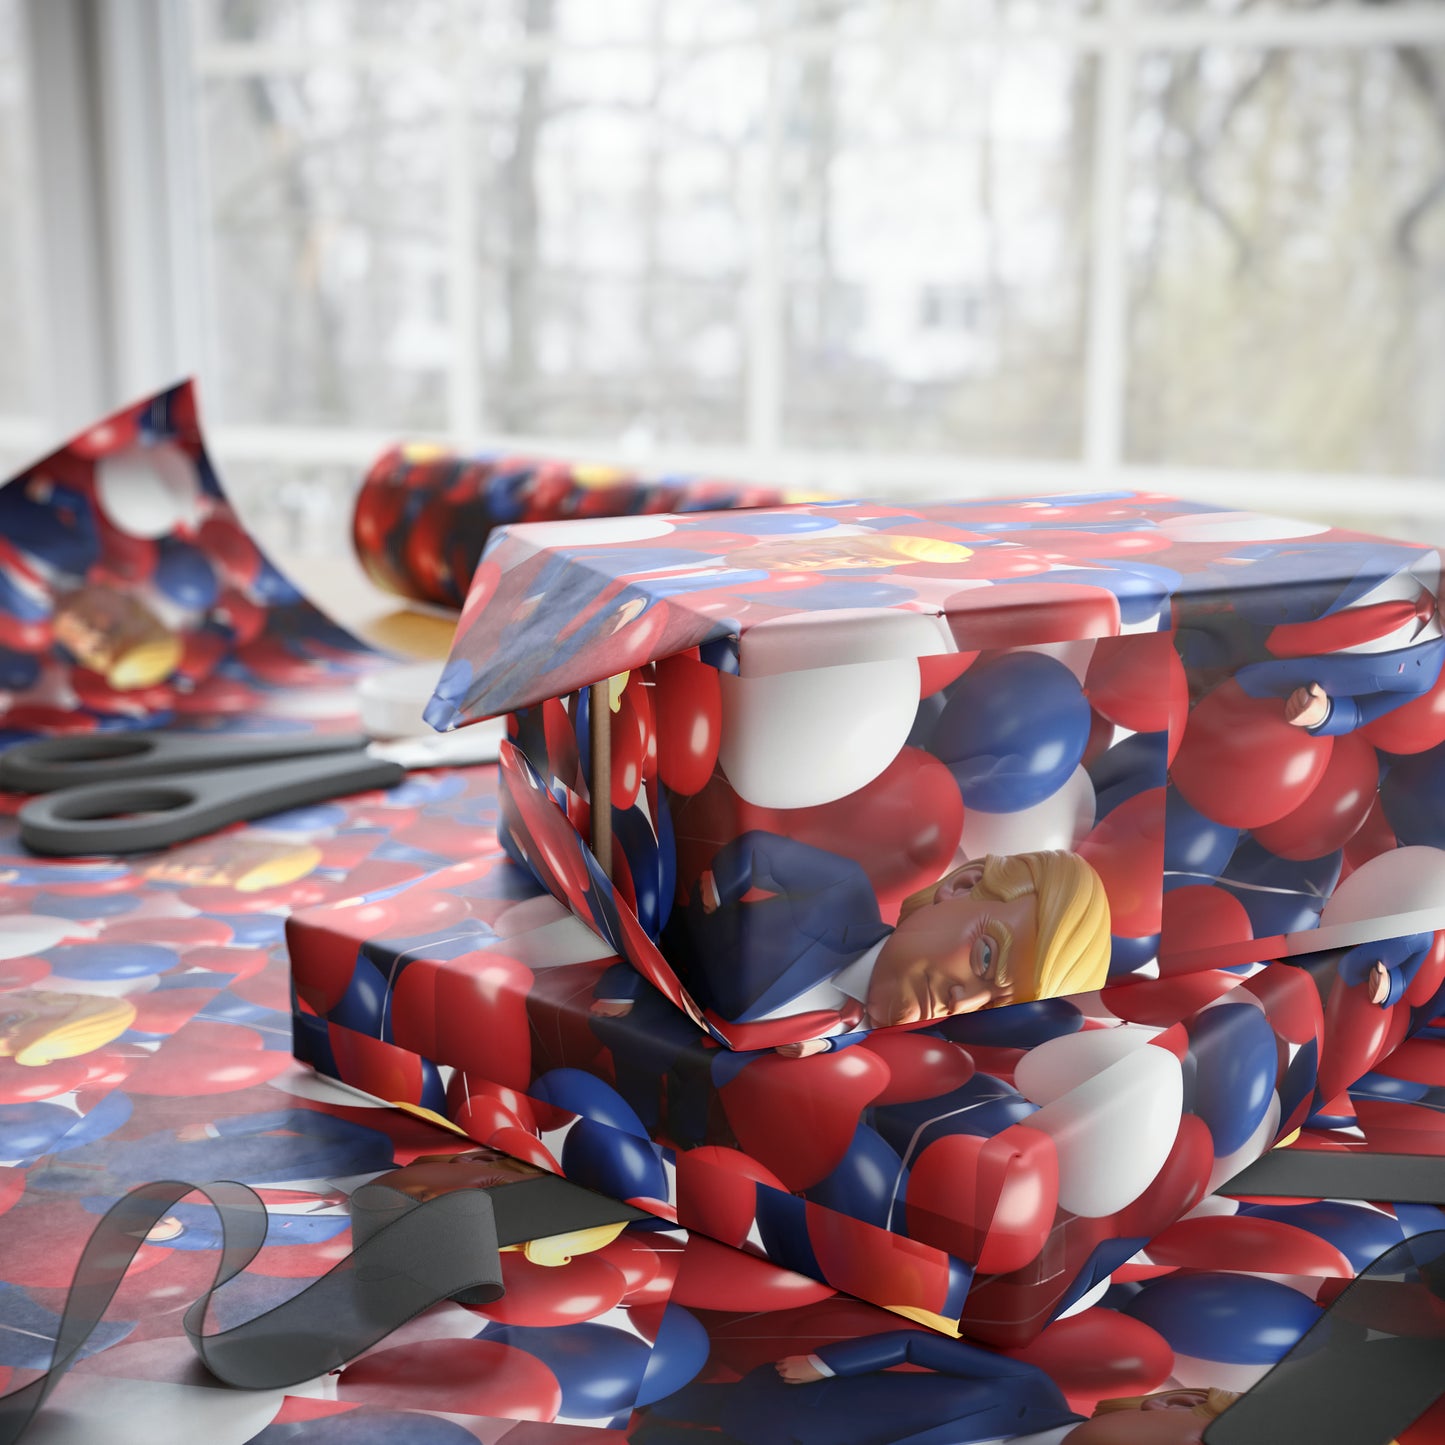 Trump Balloons Happy Birthday Red White MAGA Birthday Gift Present Wrapping Paper